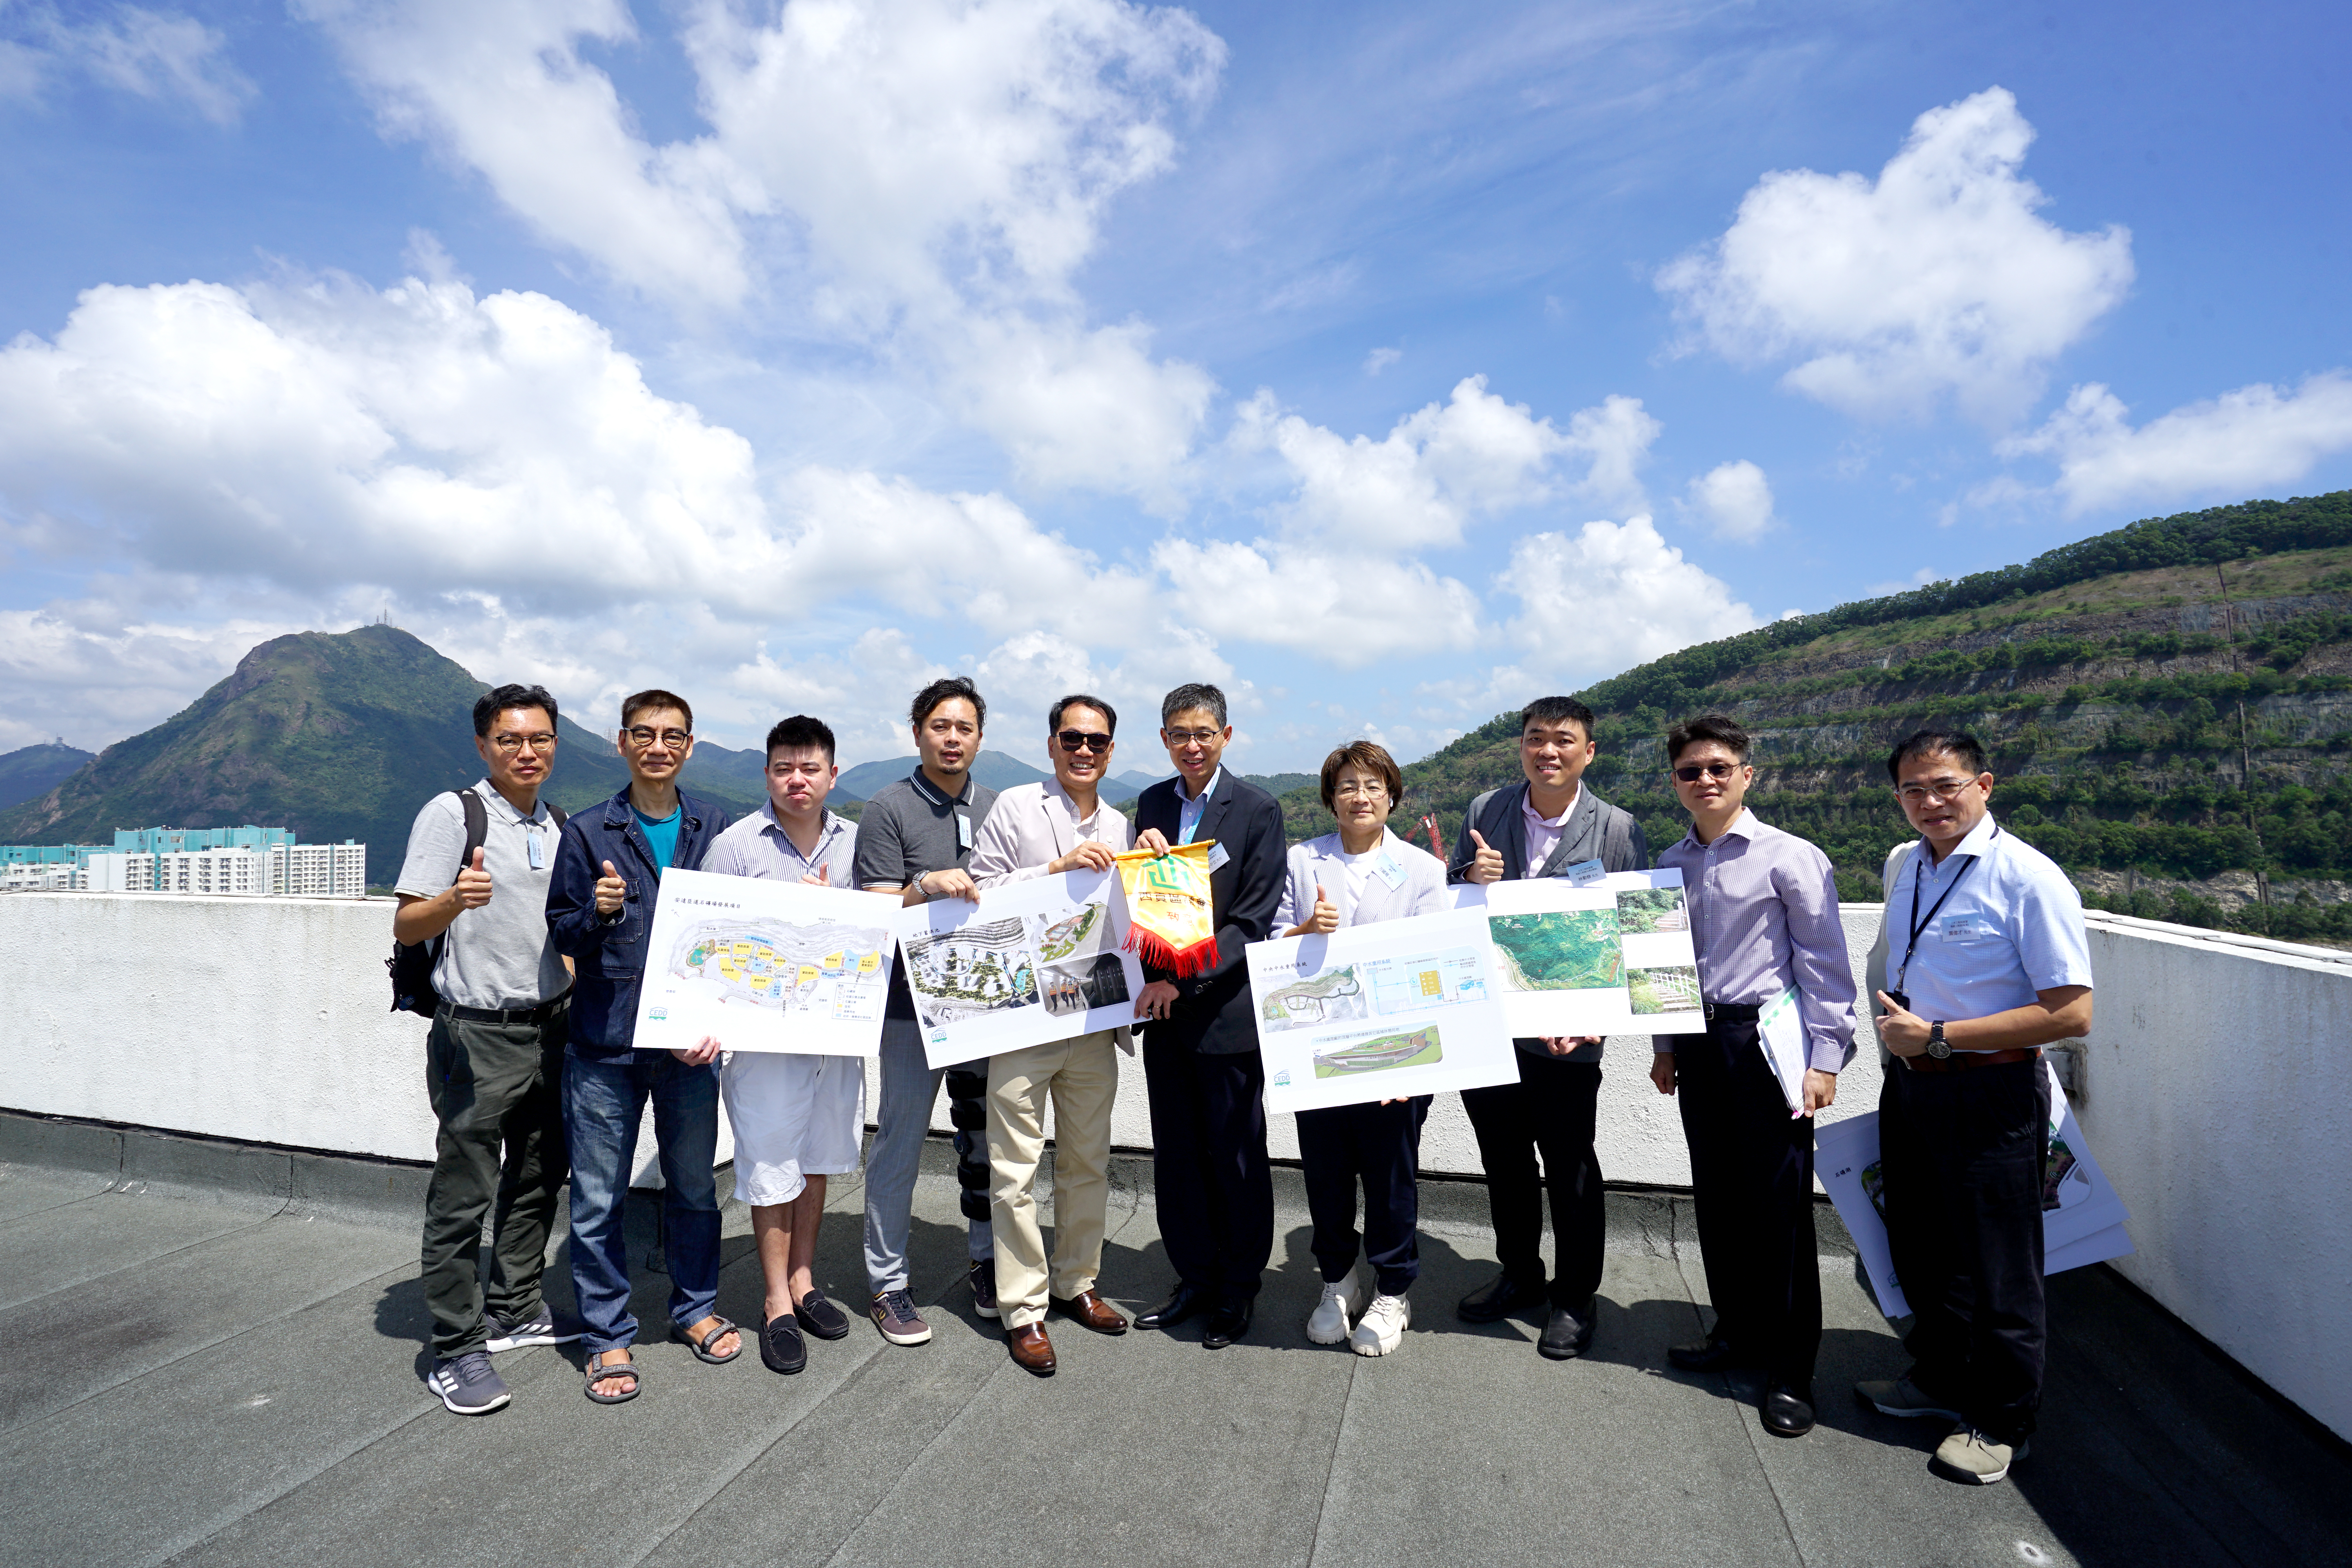 Mr. LEUNG Chung Lap, Michael, Project Manager (East) of CEDD, introduced the latest developments of the Anderson Road Quarry Site to the Sai Kung District Council.